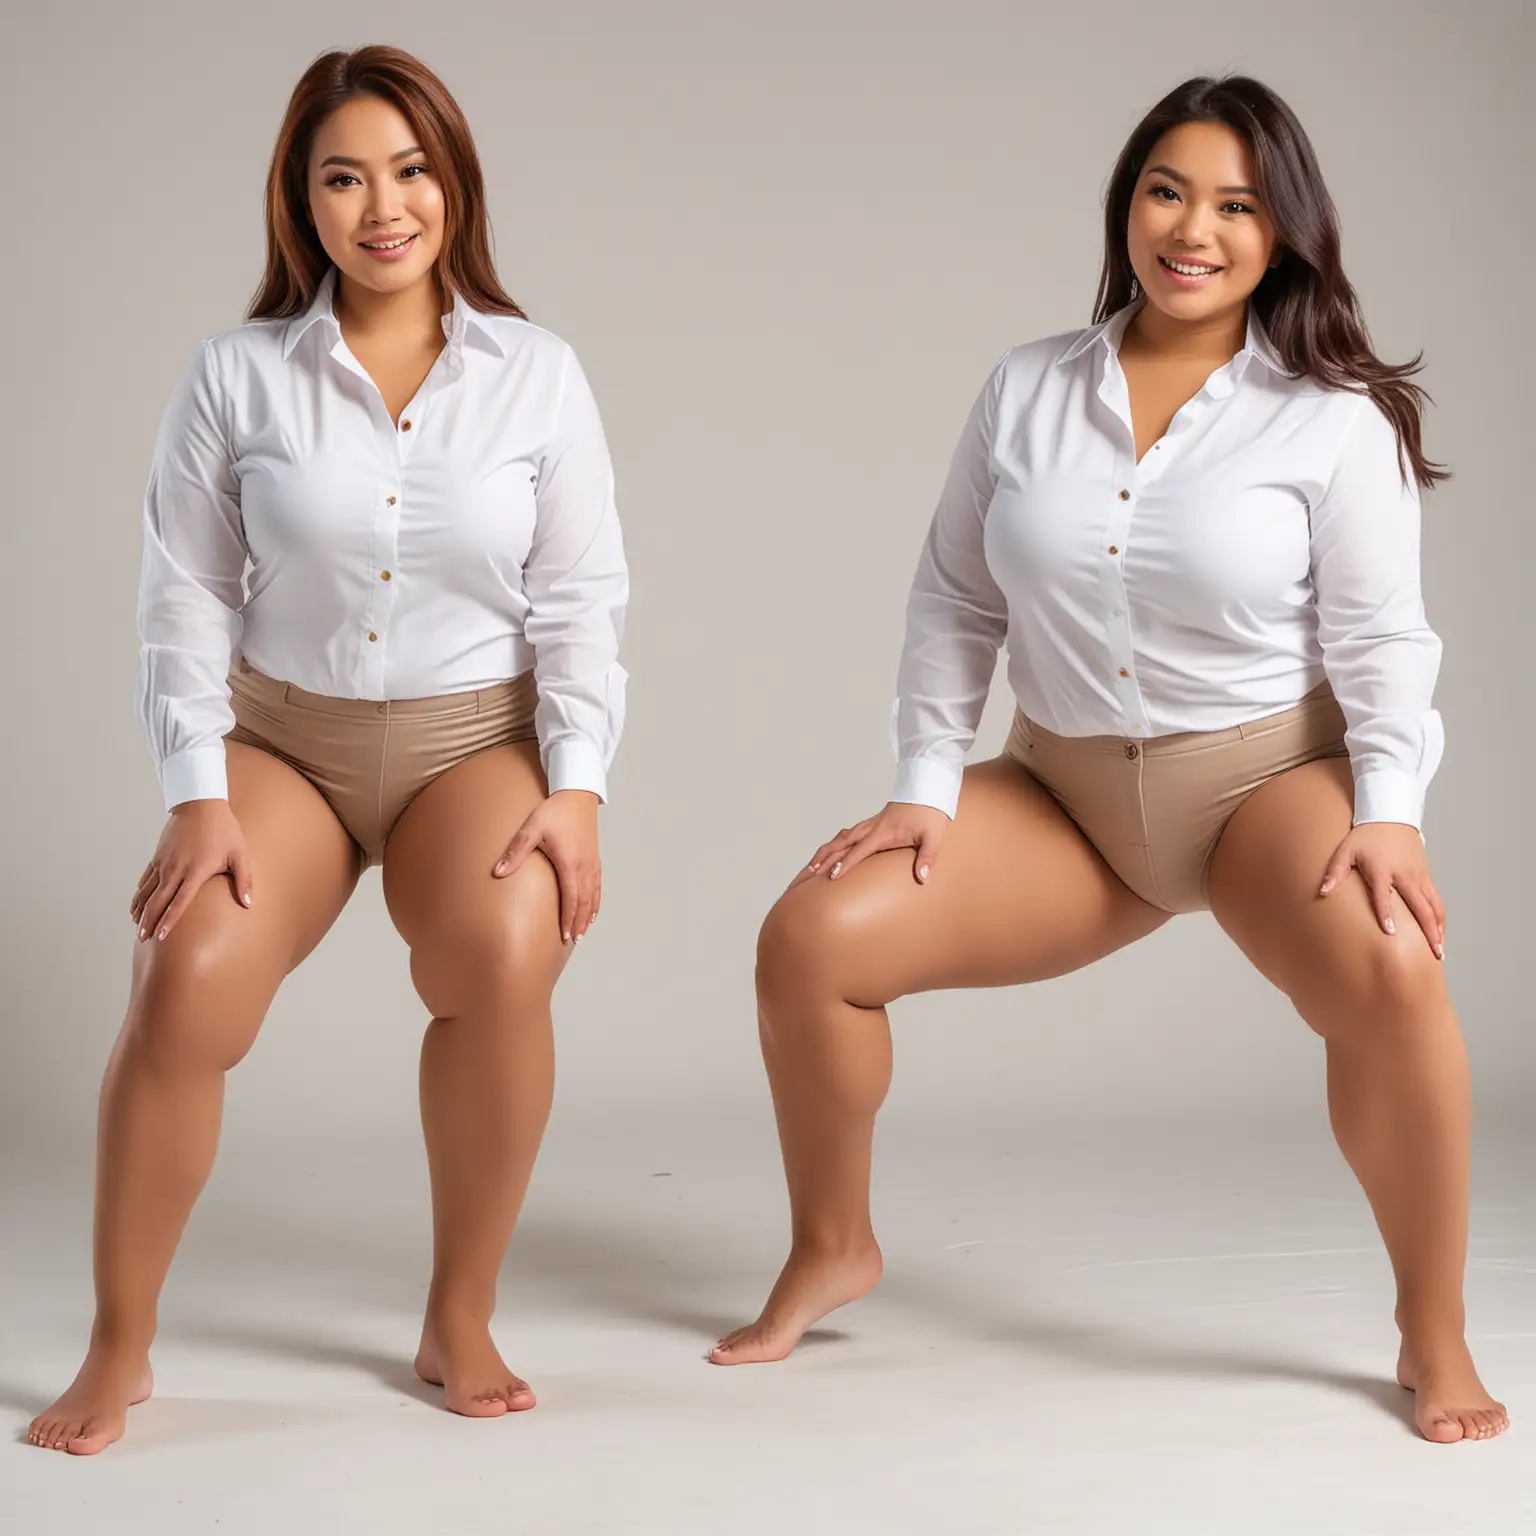 Two Filipino Women Exercising Together in White Button Down Shirts